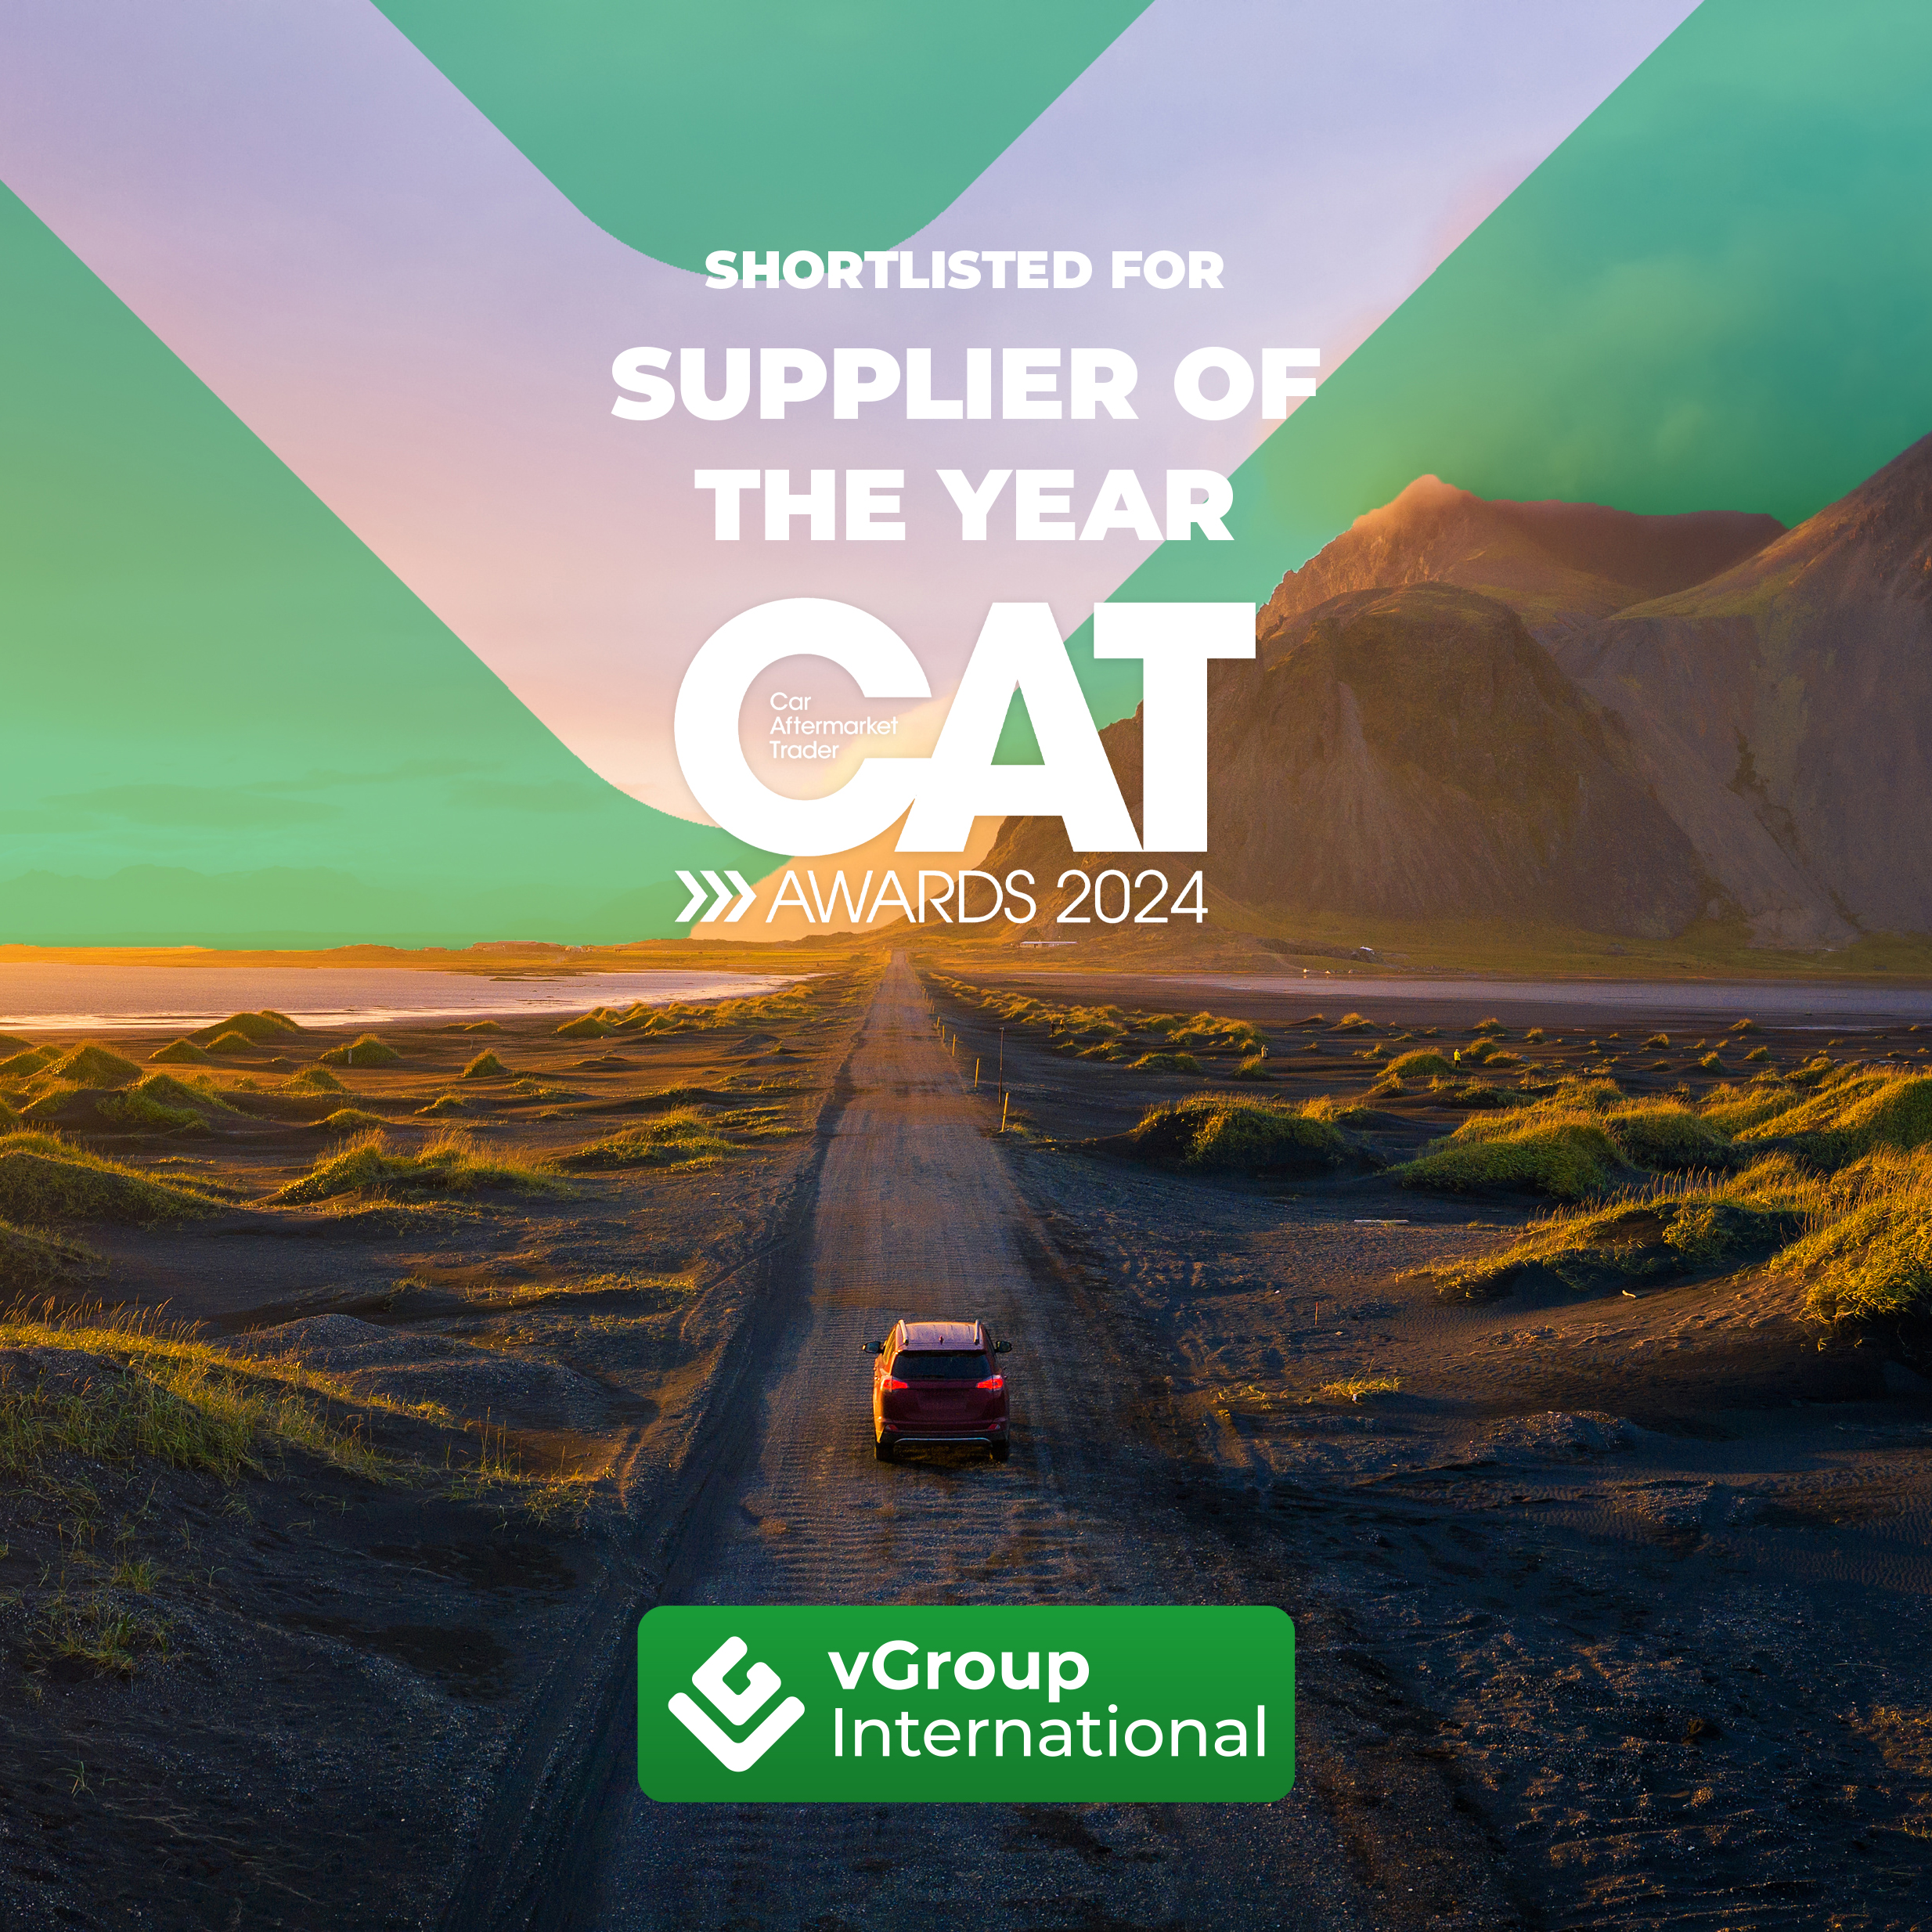 Supplier of the year - CAT awards